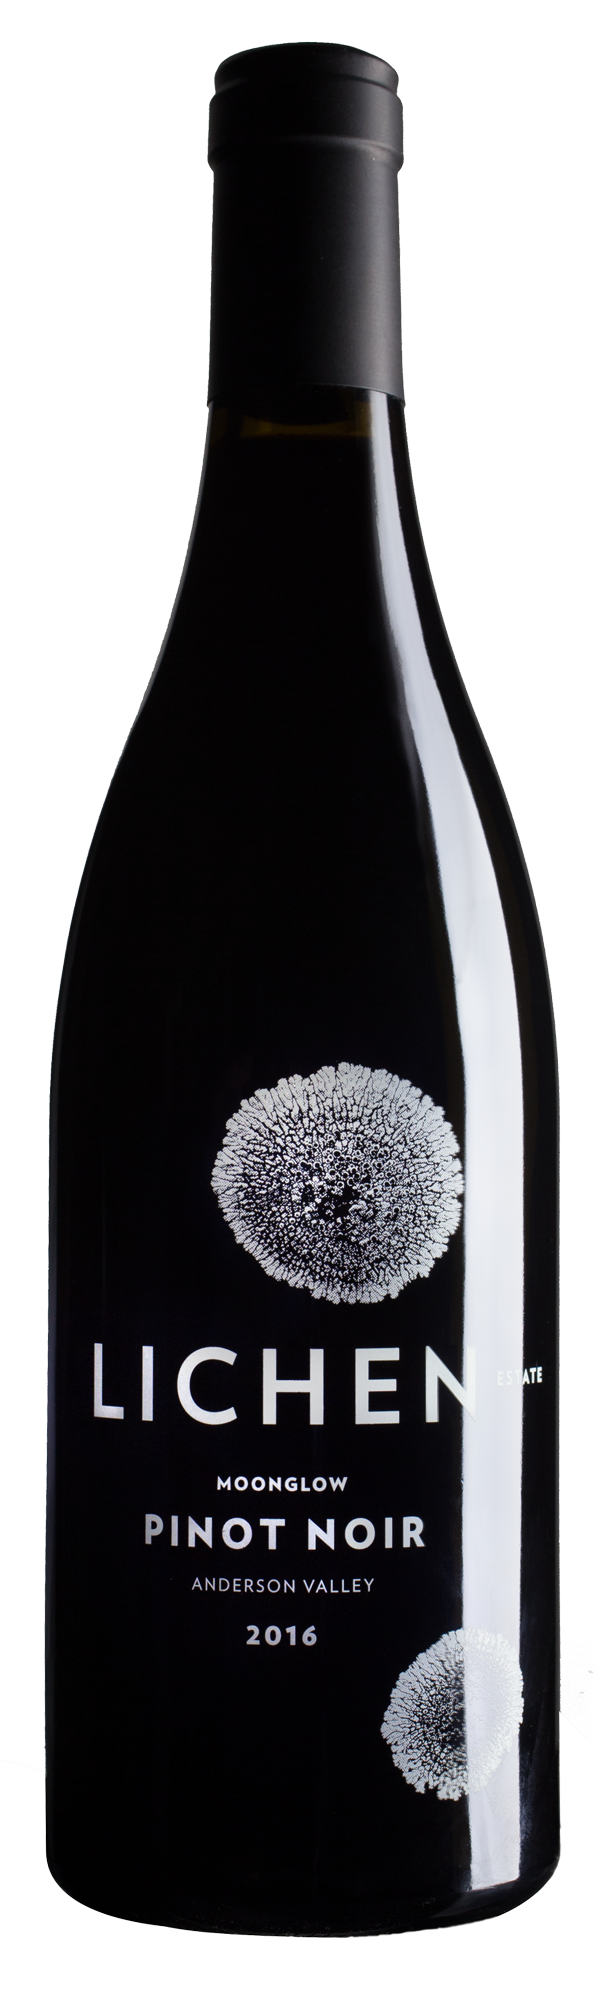 Lichen Moonglow Pinot Noir, Anderson Valley 2019 (750ml)